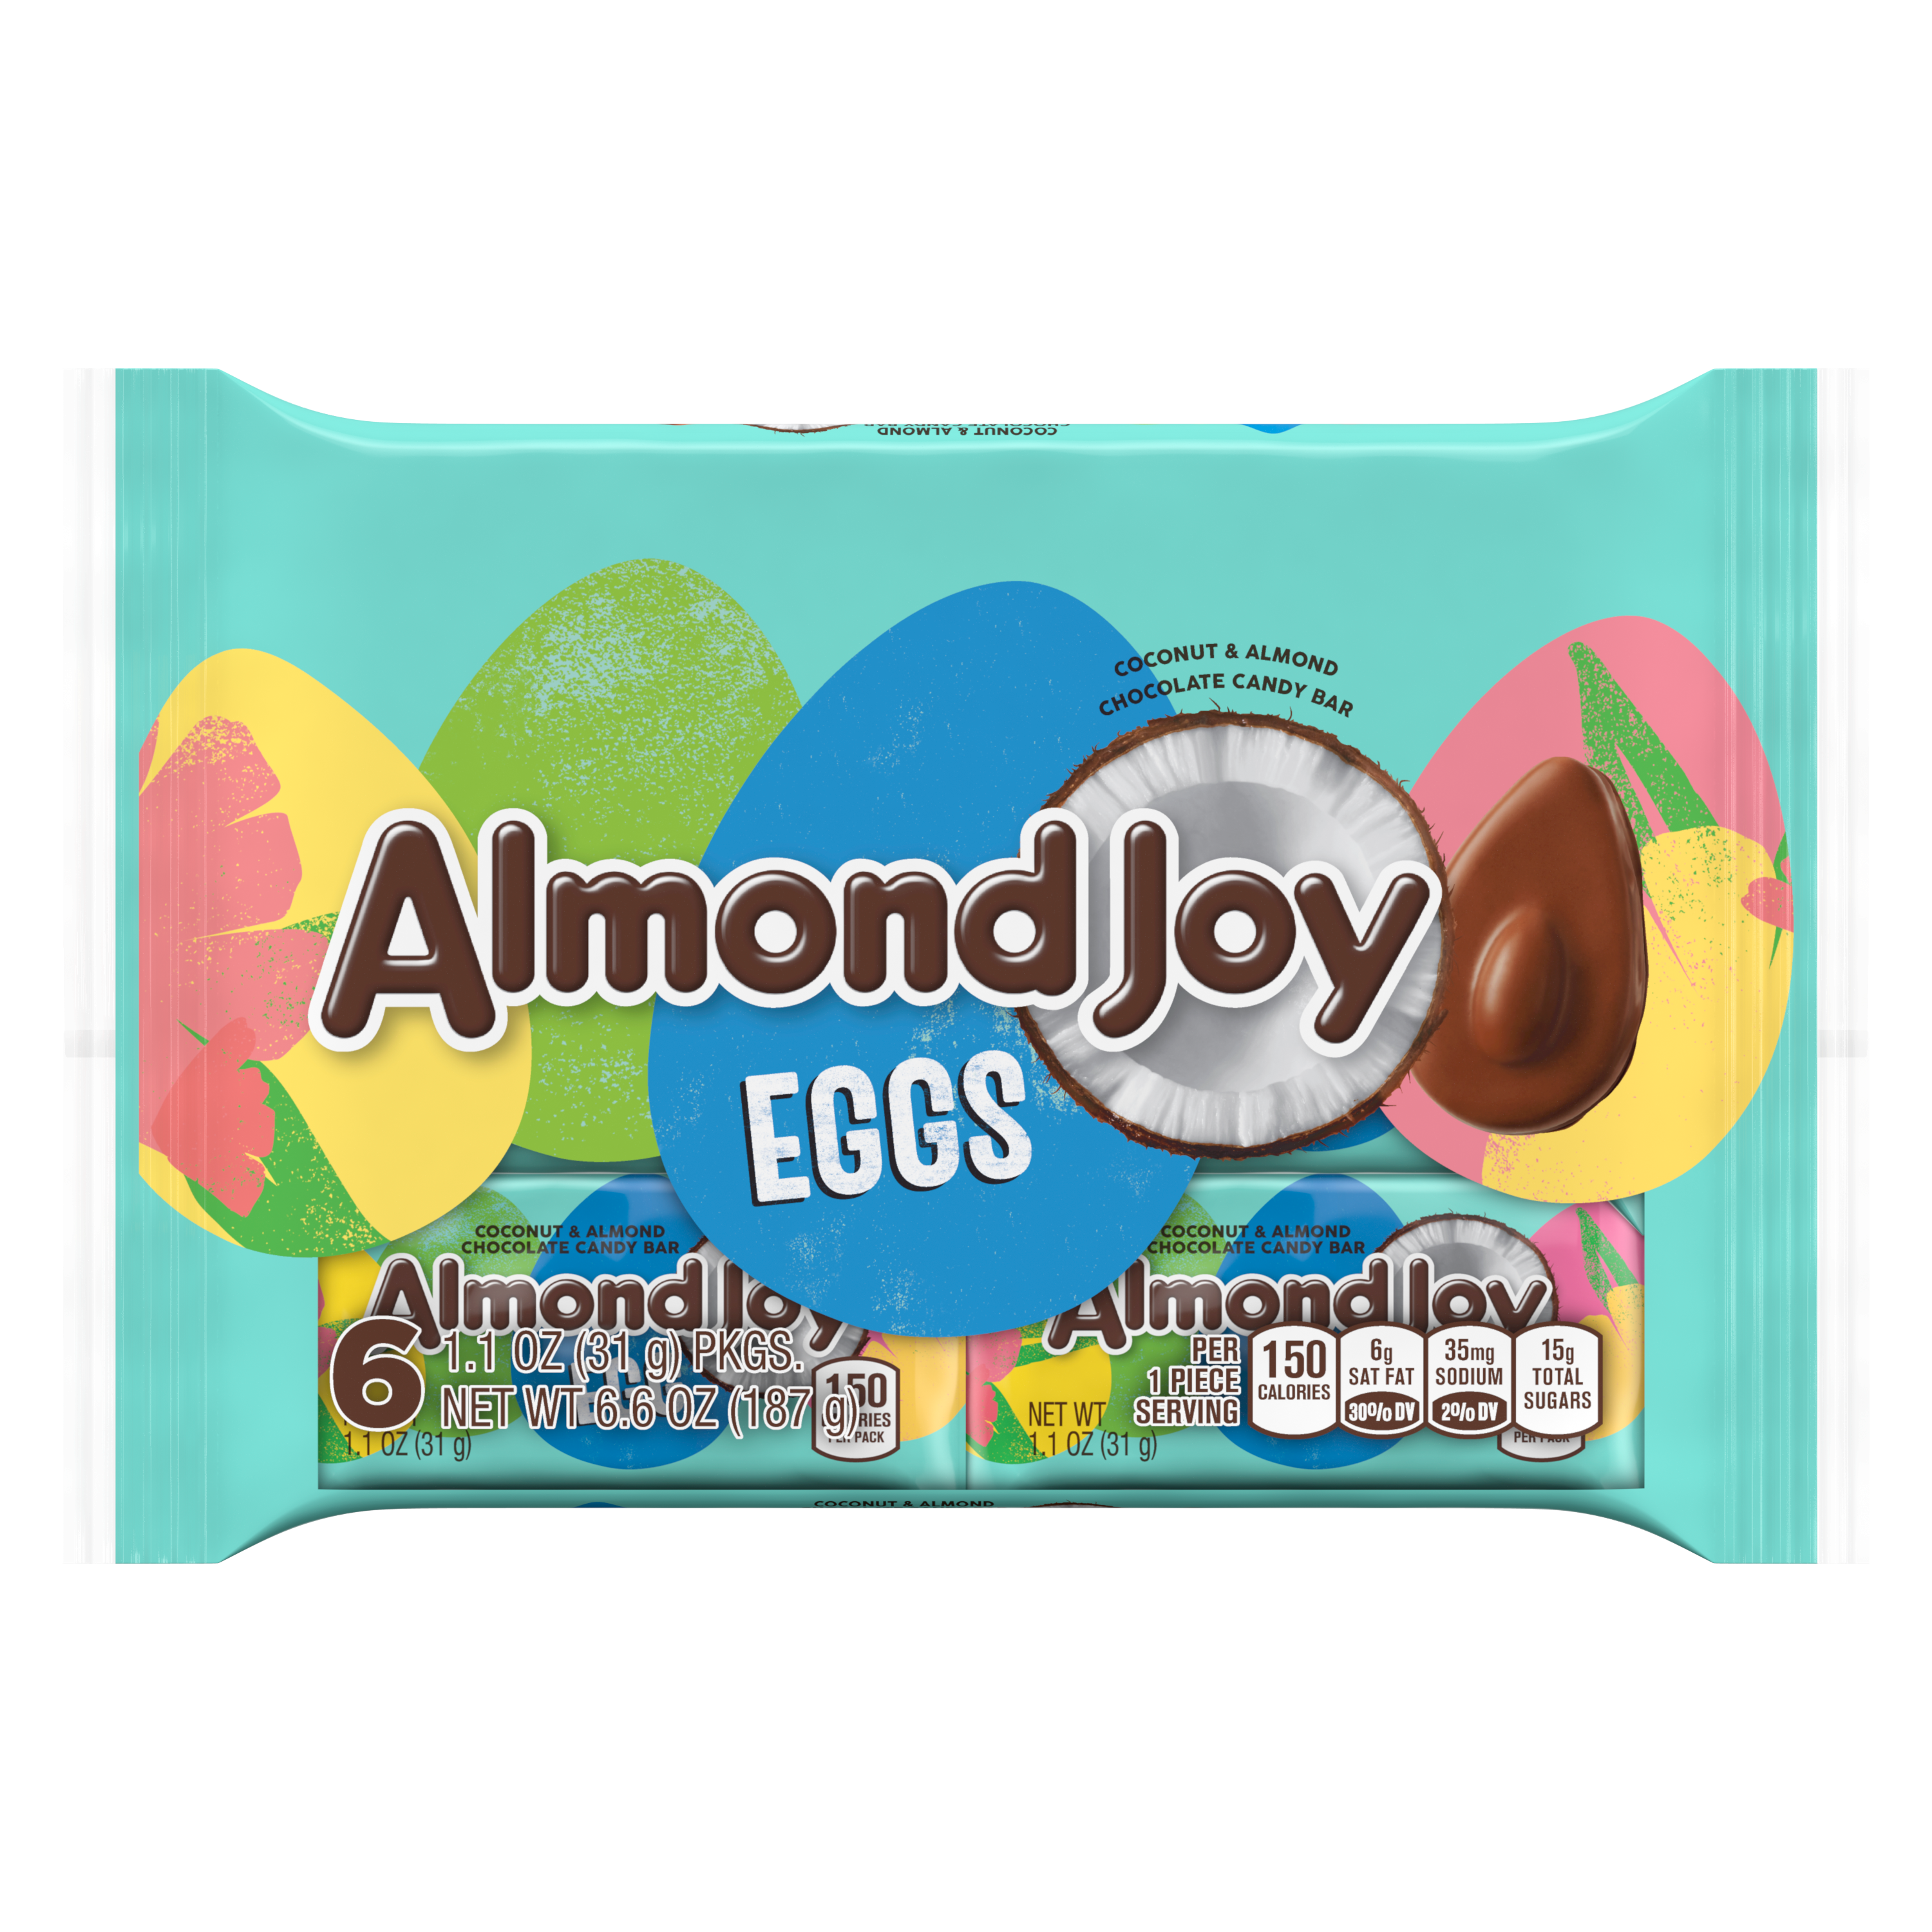 ALMOND JOY Easter Coconut and Almond Chocolate Eggs, 1.1 oz, 6 pack - Front of Package